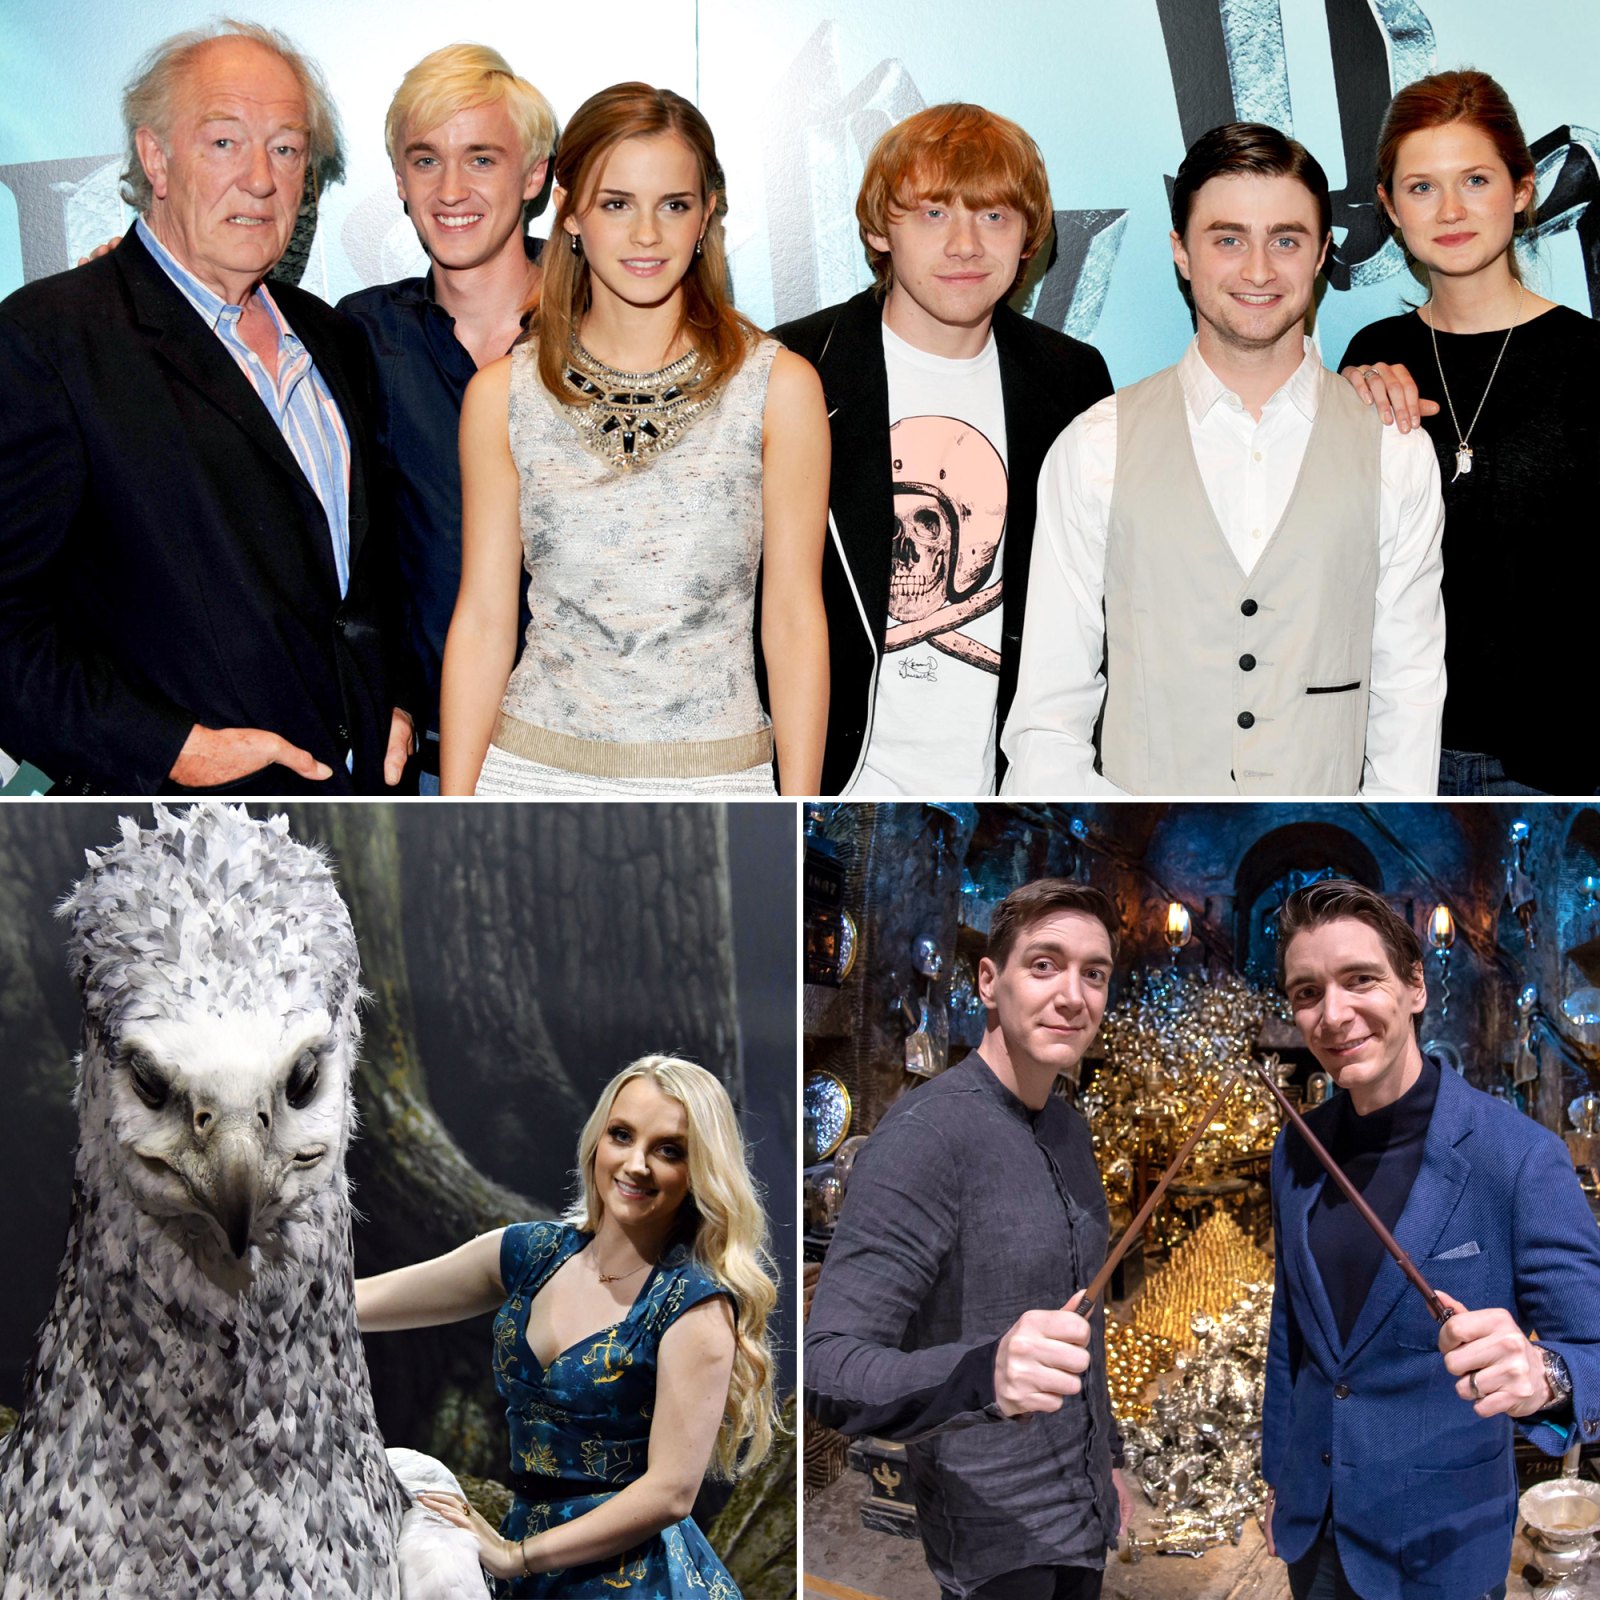 The Magic Continues: Catching up with the Harry Potter Cast 2